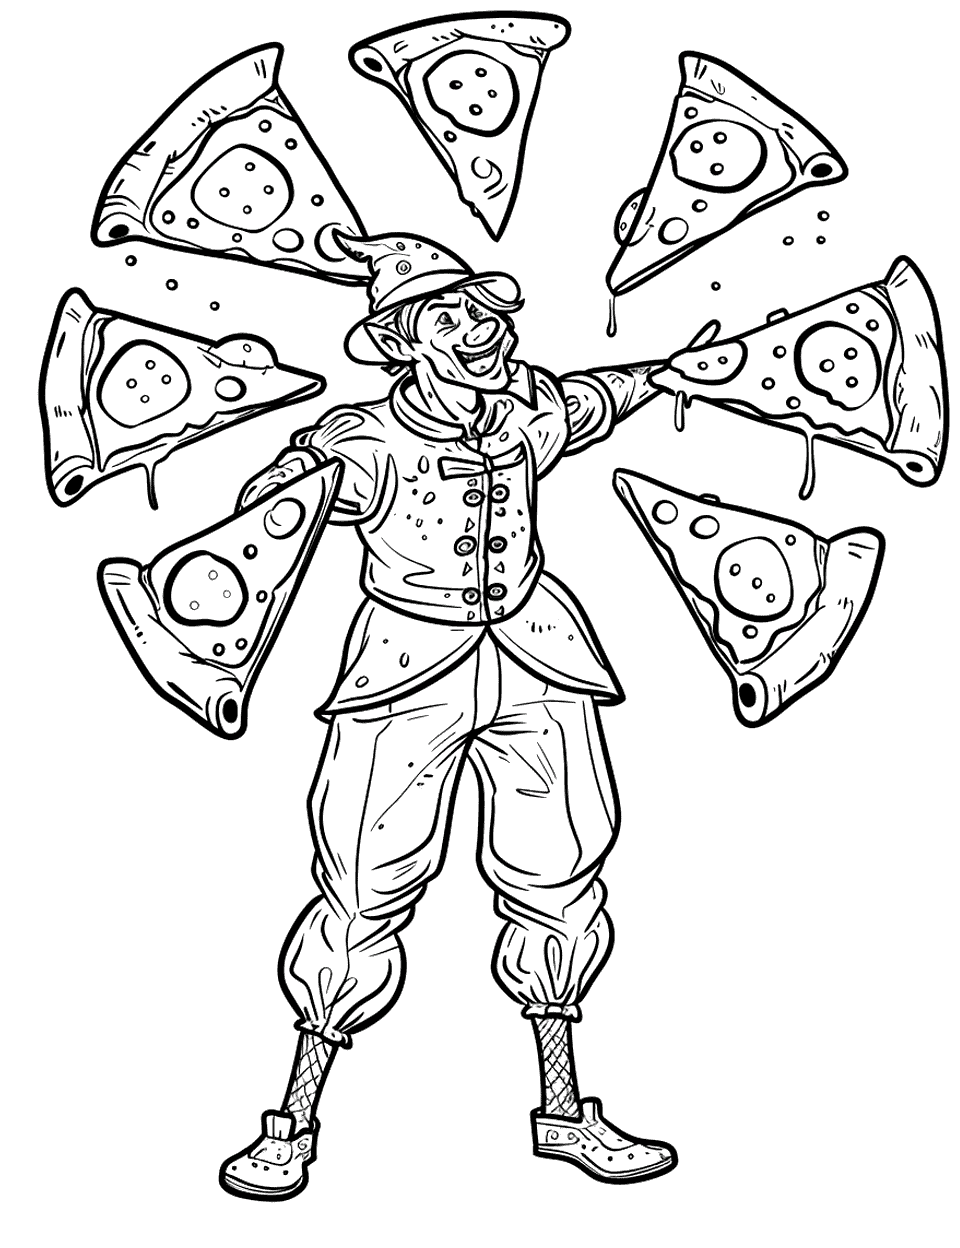 Pizza Juggling Jester Coloring Page - A jester juggling pizza slices instead of balls.